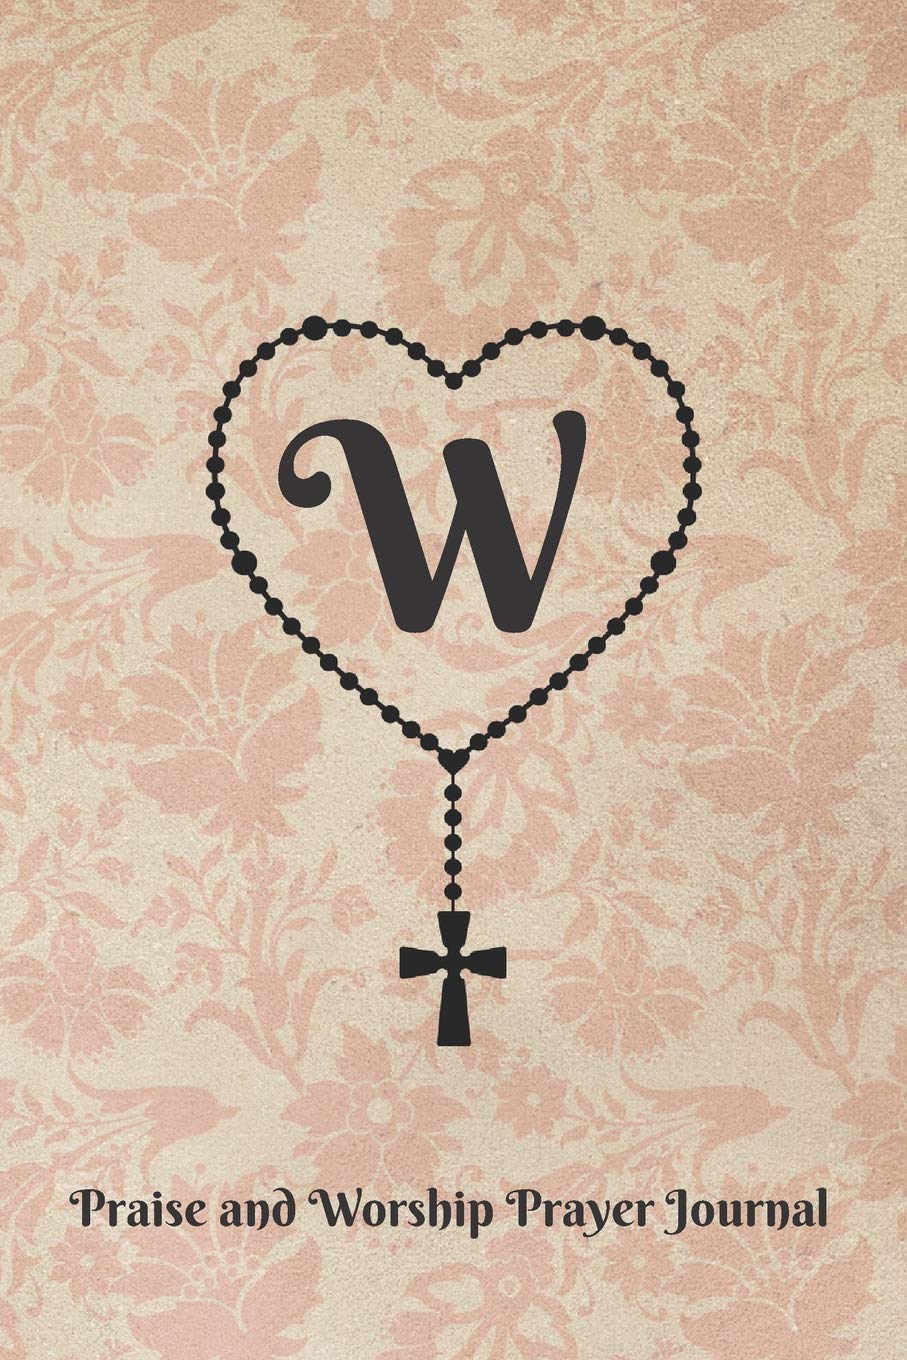 Letter W Personalized Monogram Praise and Worship Prayer Journal Cross: Heart Shaped Rosary Beads with Cross on Antique Floral Wallpaper Pattern in Rose Beige Bible Study Notebook: Publishing, Nine Forty